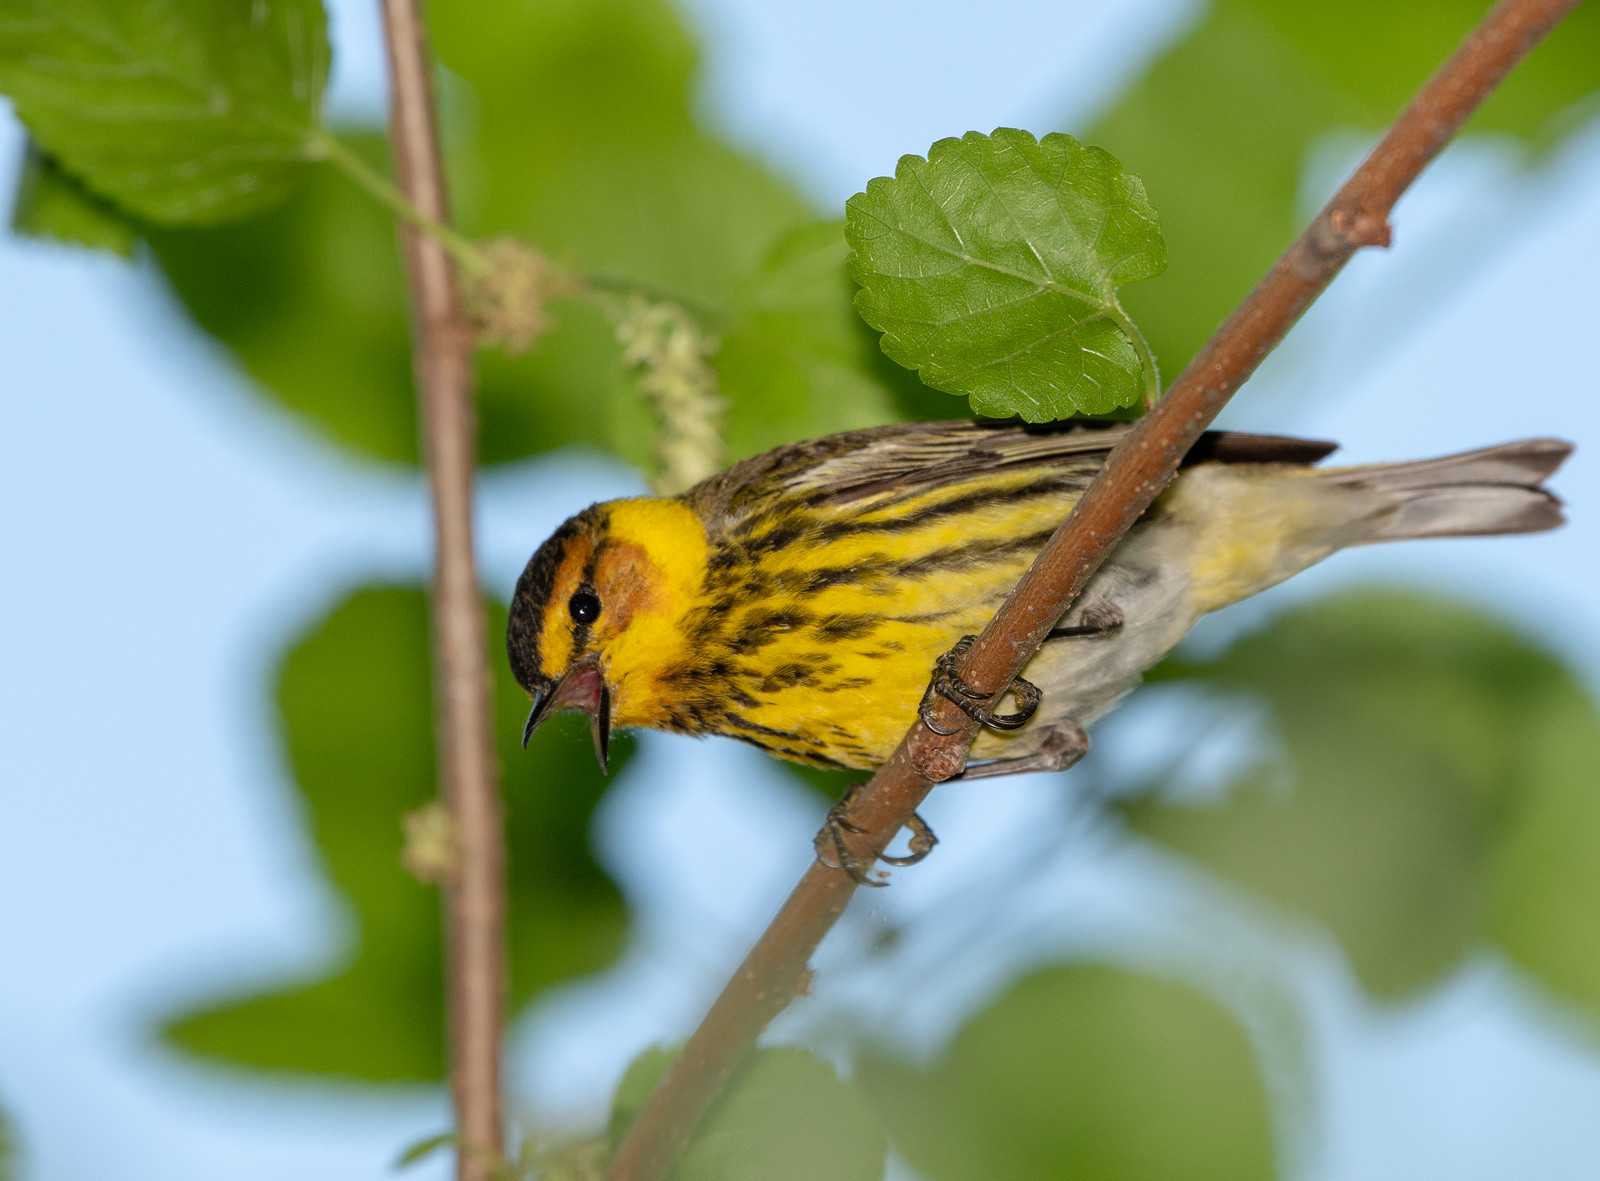 Cape May Warbler Female